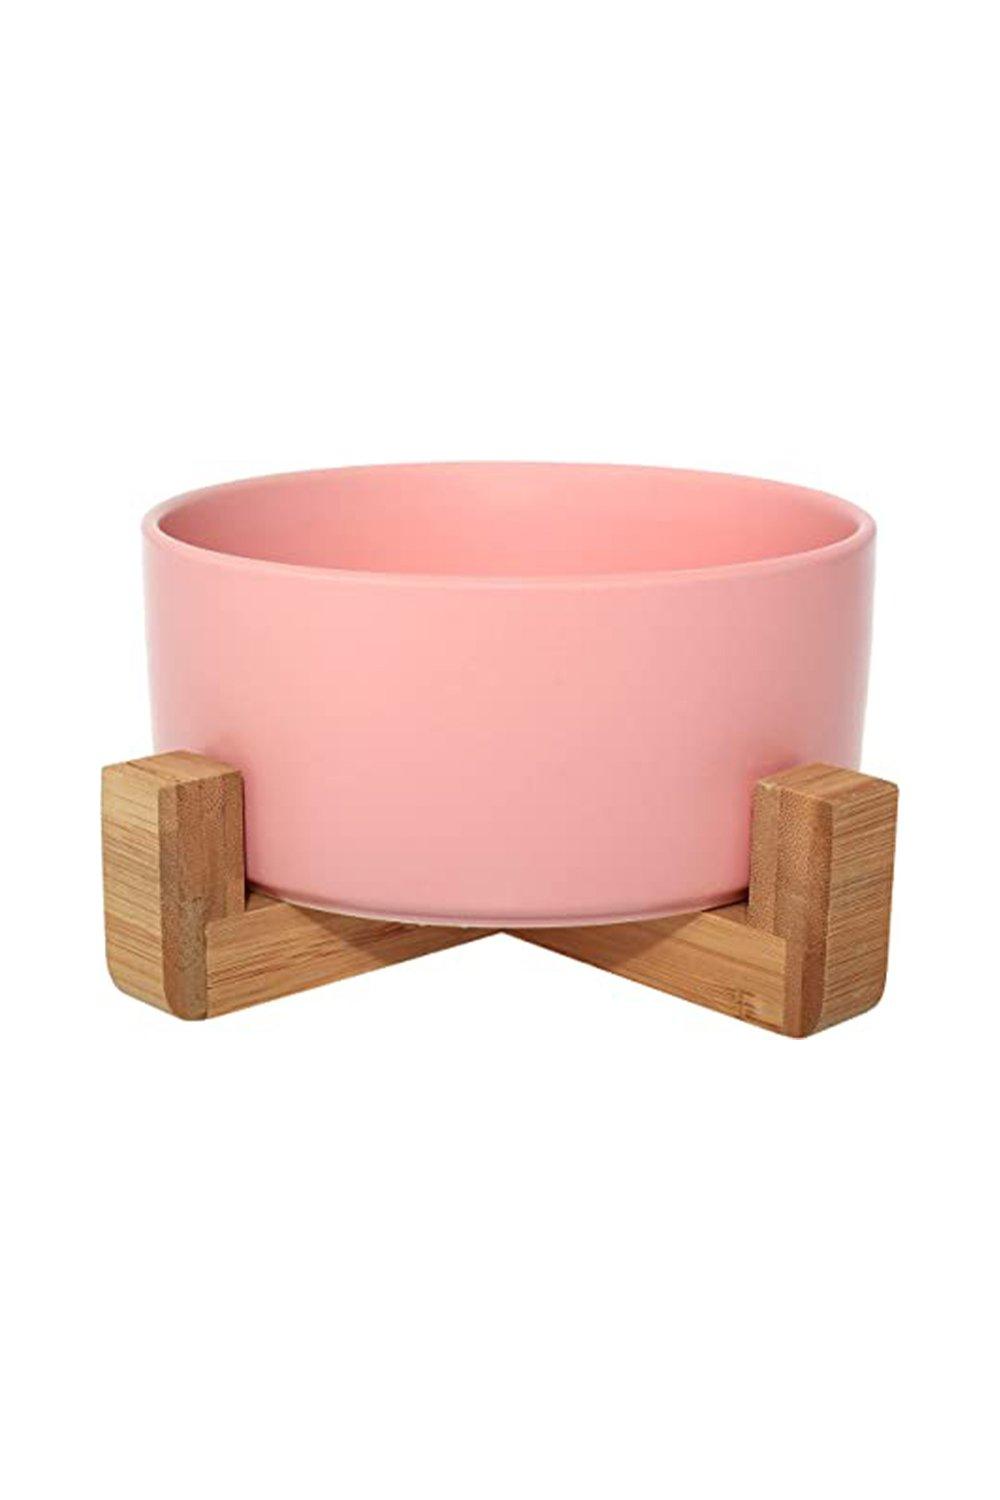 pet wiz Ceramic Bowl with Bamboo Stand for Dogs & Cats